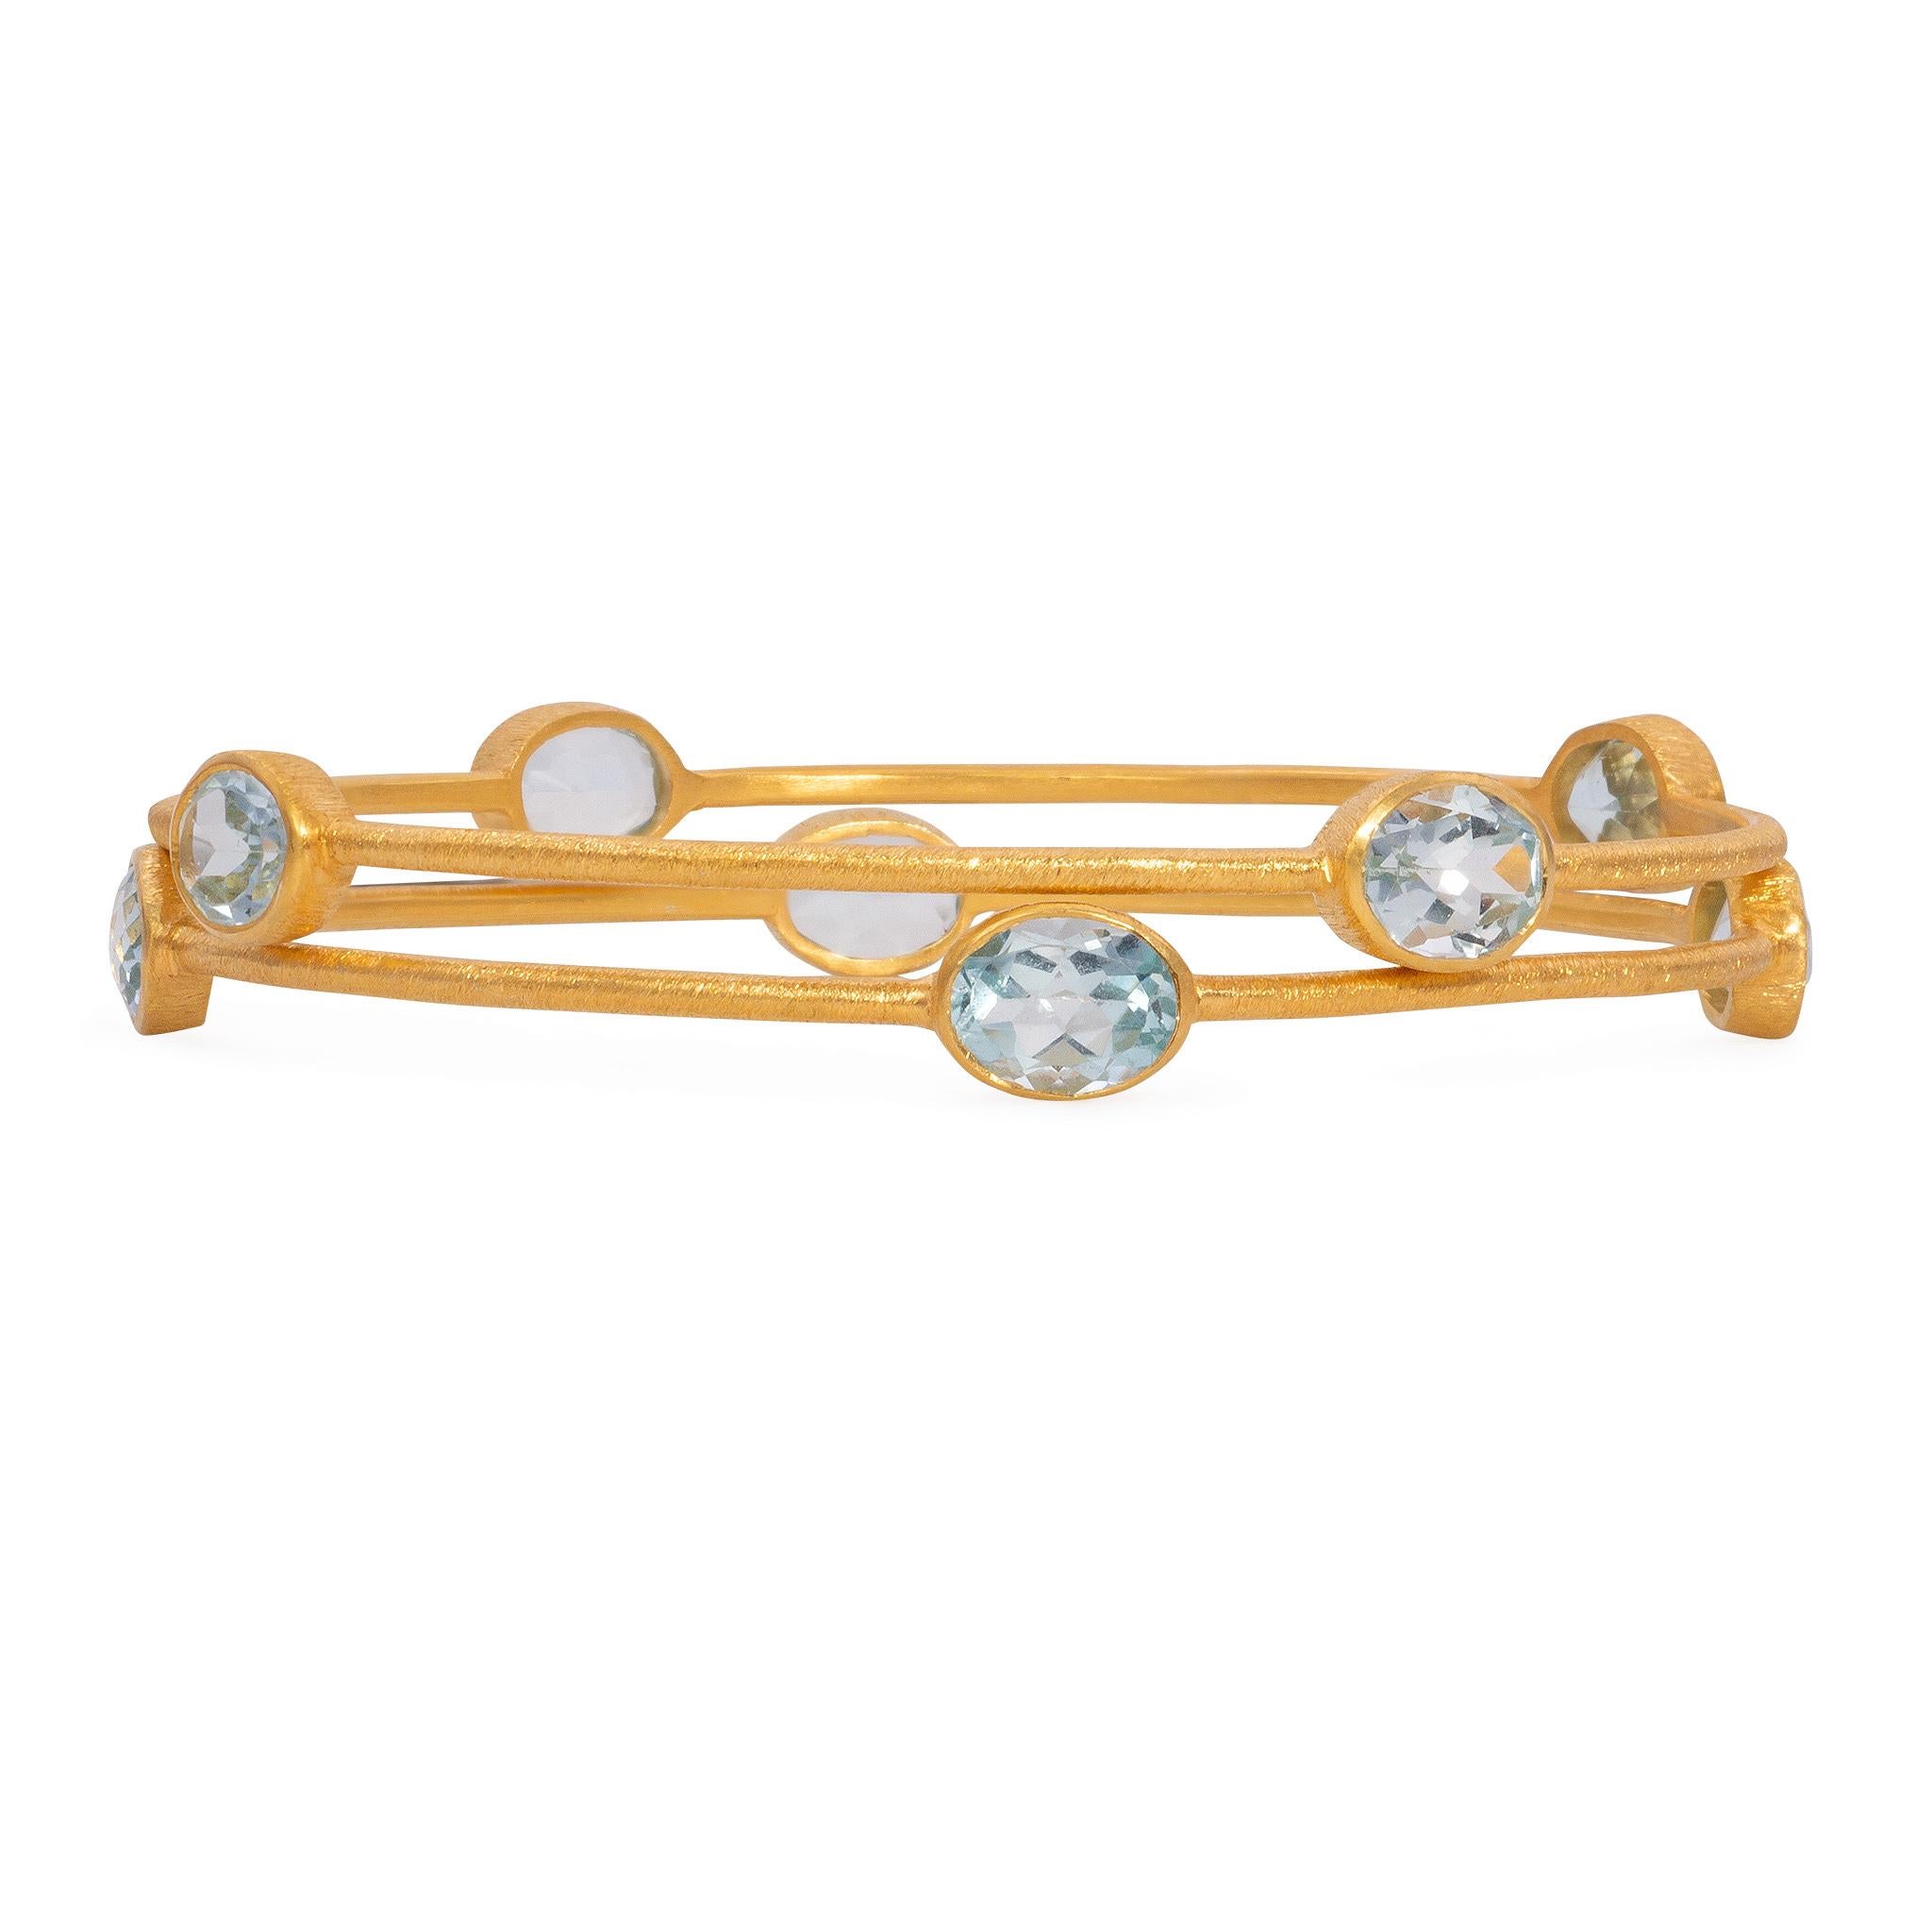 22k Brushed Gold Vermeil Bangle with 4 London Blue Topaz Stones.  London Blue Topaz is topaz stone that has a specific medium blue color. It’s darker then aquamarine or Swiss Blue Topaz, but lighter than what we normally look for in a blue sapphire.